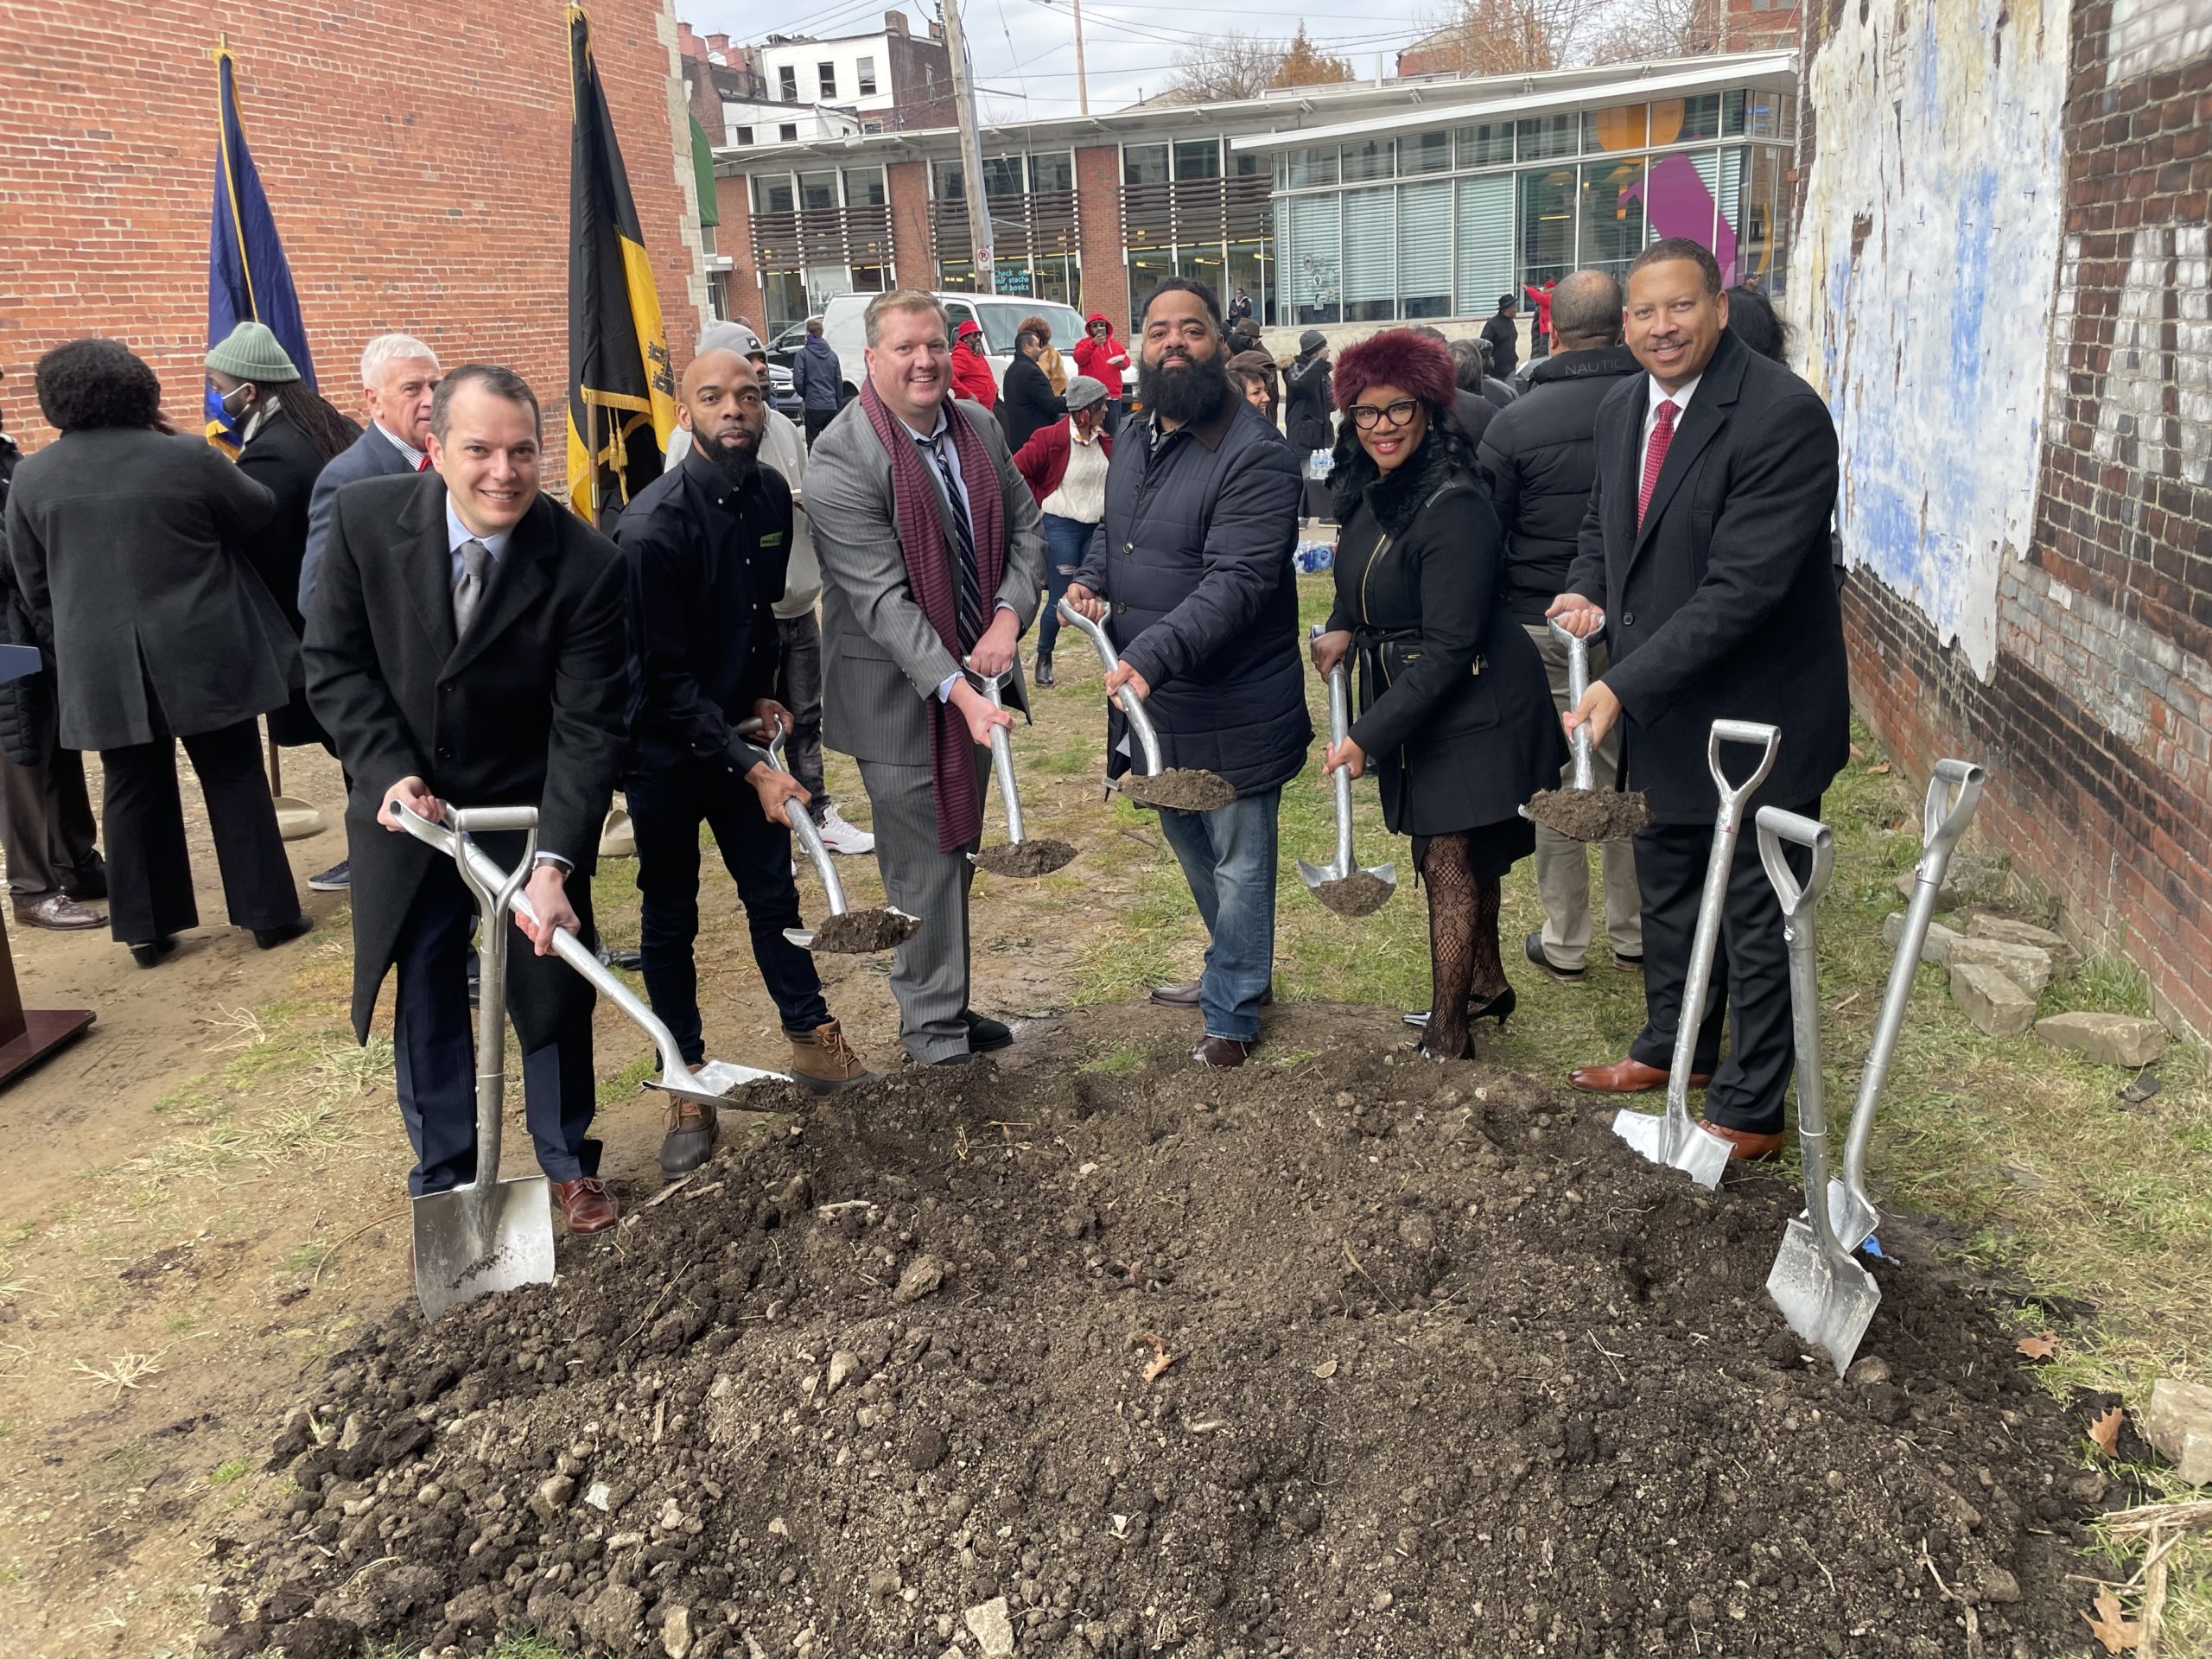 Image take at the groundbreaking of Big Tom's new building on Centre Avenue. People gathered around a pile of dirt, each holding a shovel full, to symbolize the official groundbreaking. Read caption for names.